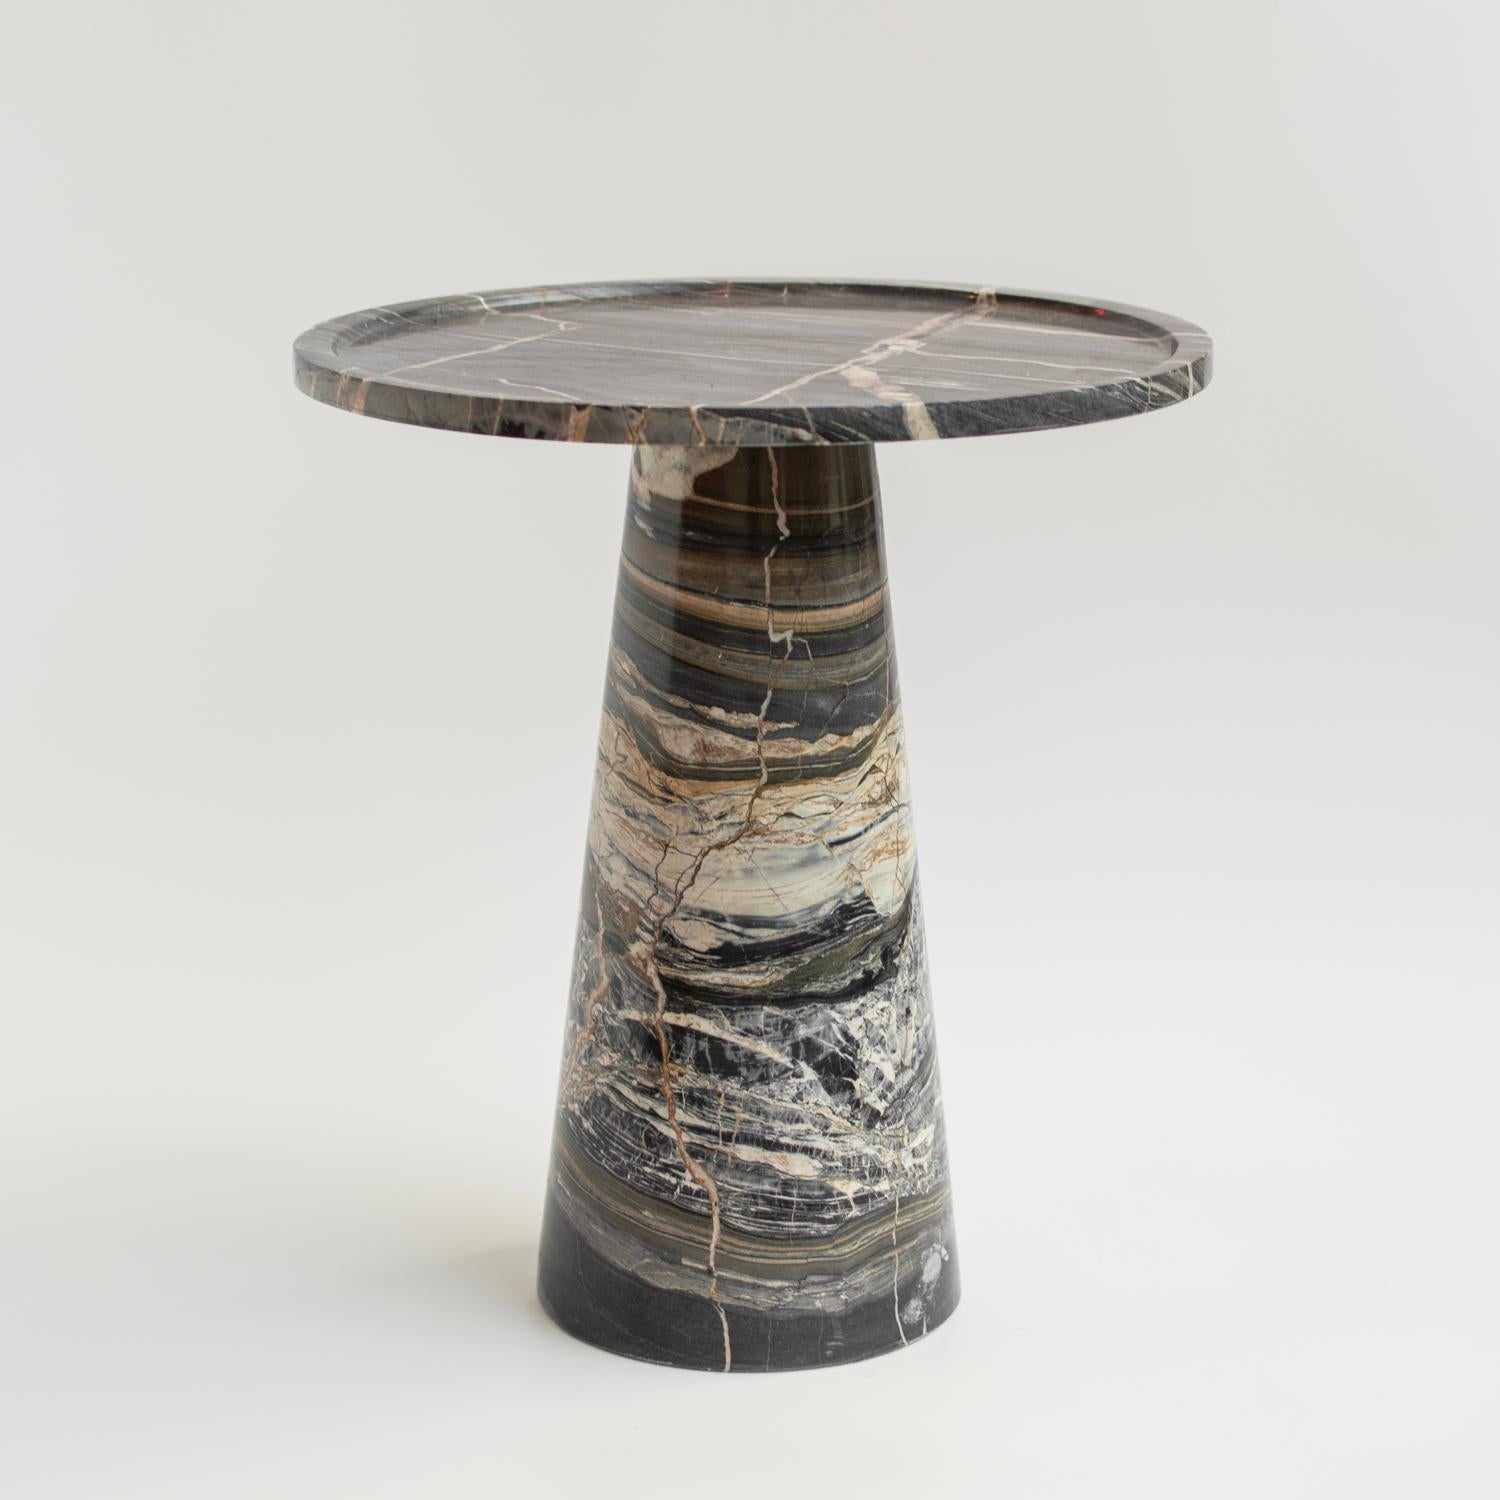 Stunning, aesthetic, timeless are words that can be used to describe this elegant and modern side table from Kiwano. Expertly crafted and finished by hand, our marble side tables are a study in sculptural simplicity. Natural variations in the